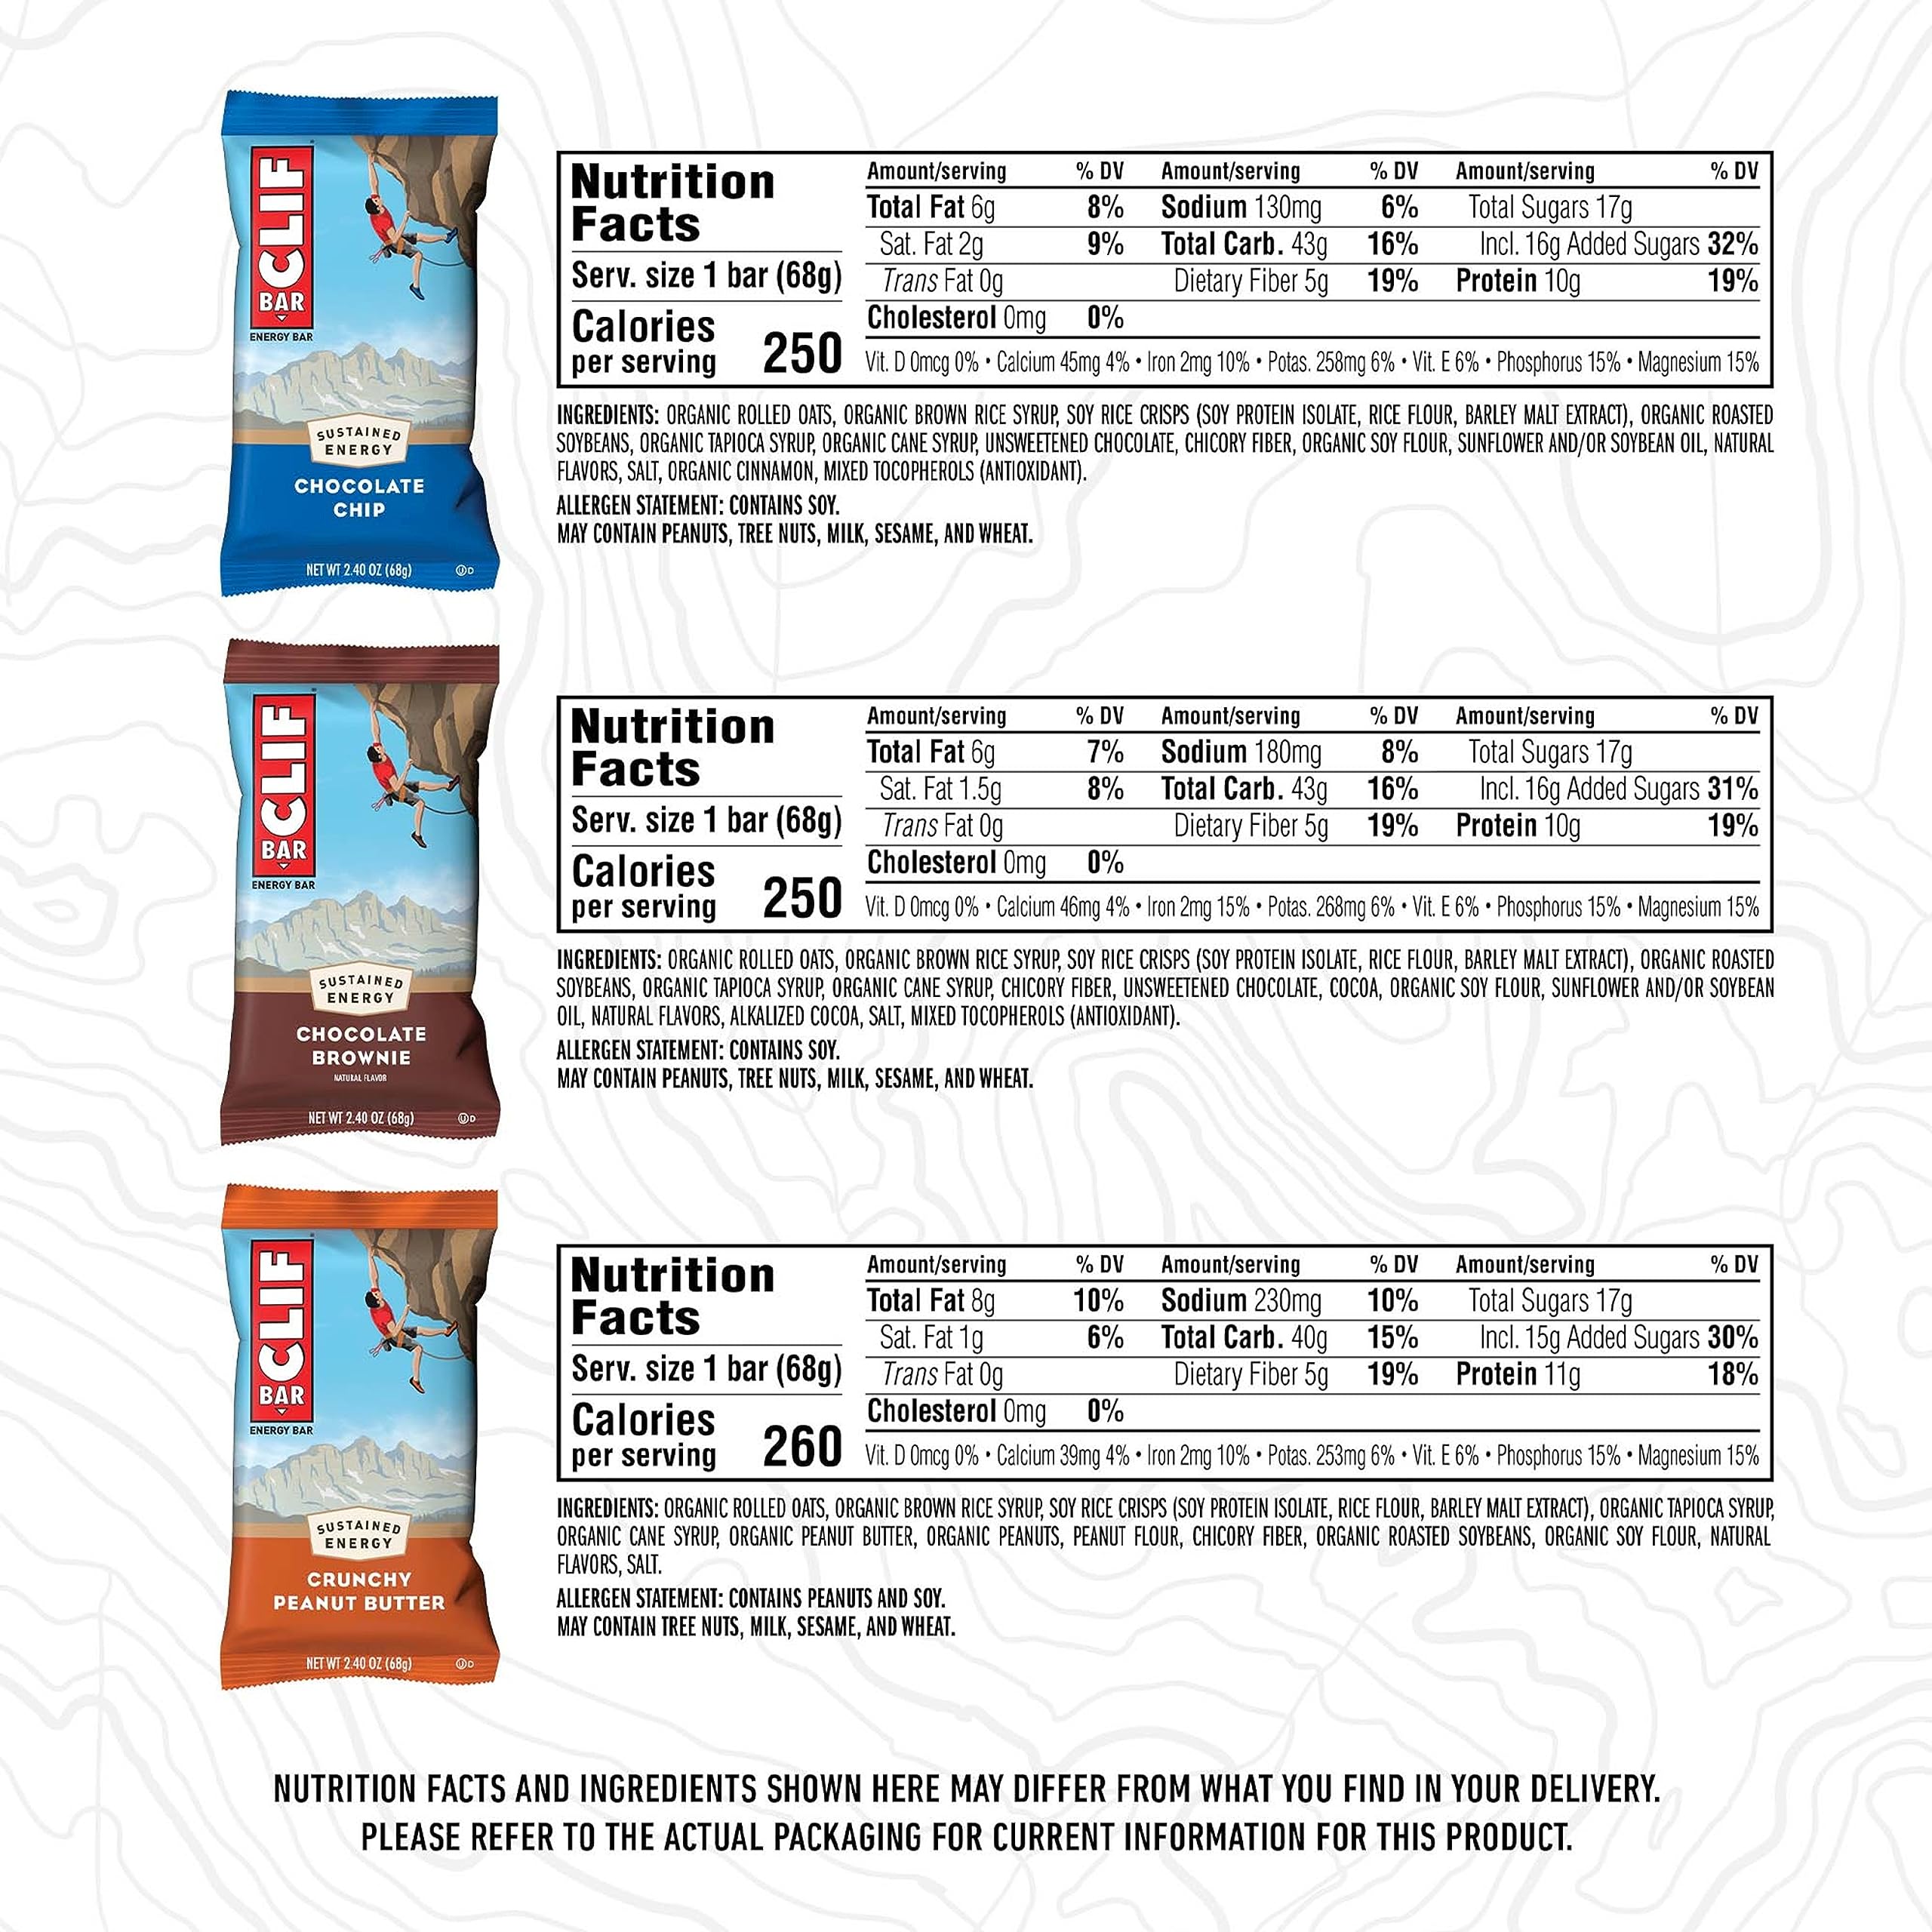 CLIF BAR - Best Sellers Variety Pack - Energy Bars - Packaging & Assortment May Vary - Amazon Exclusive - 2.4 oz. (16 Count)